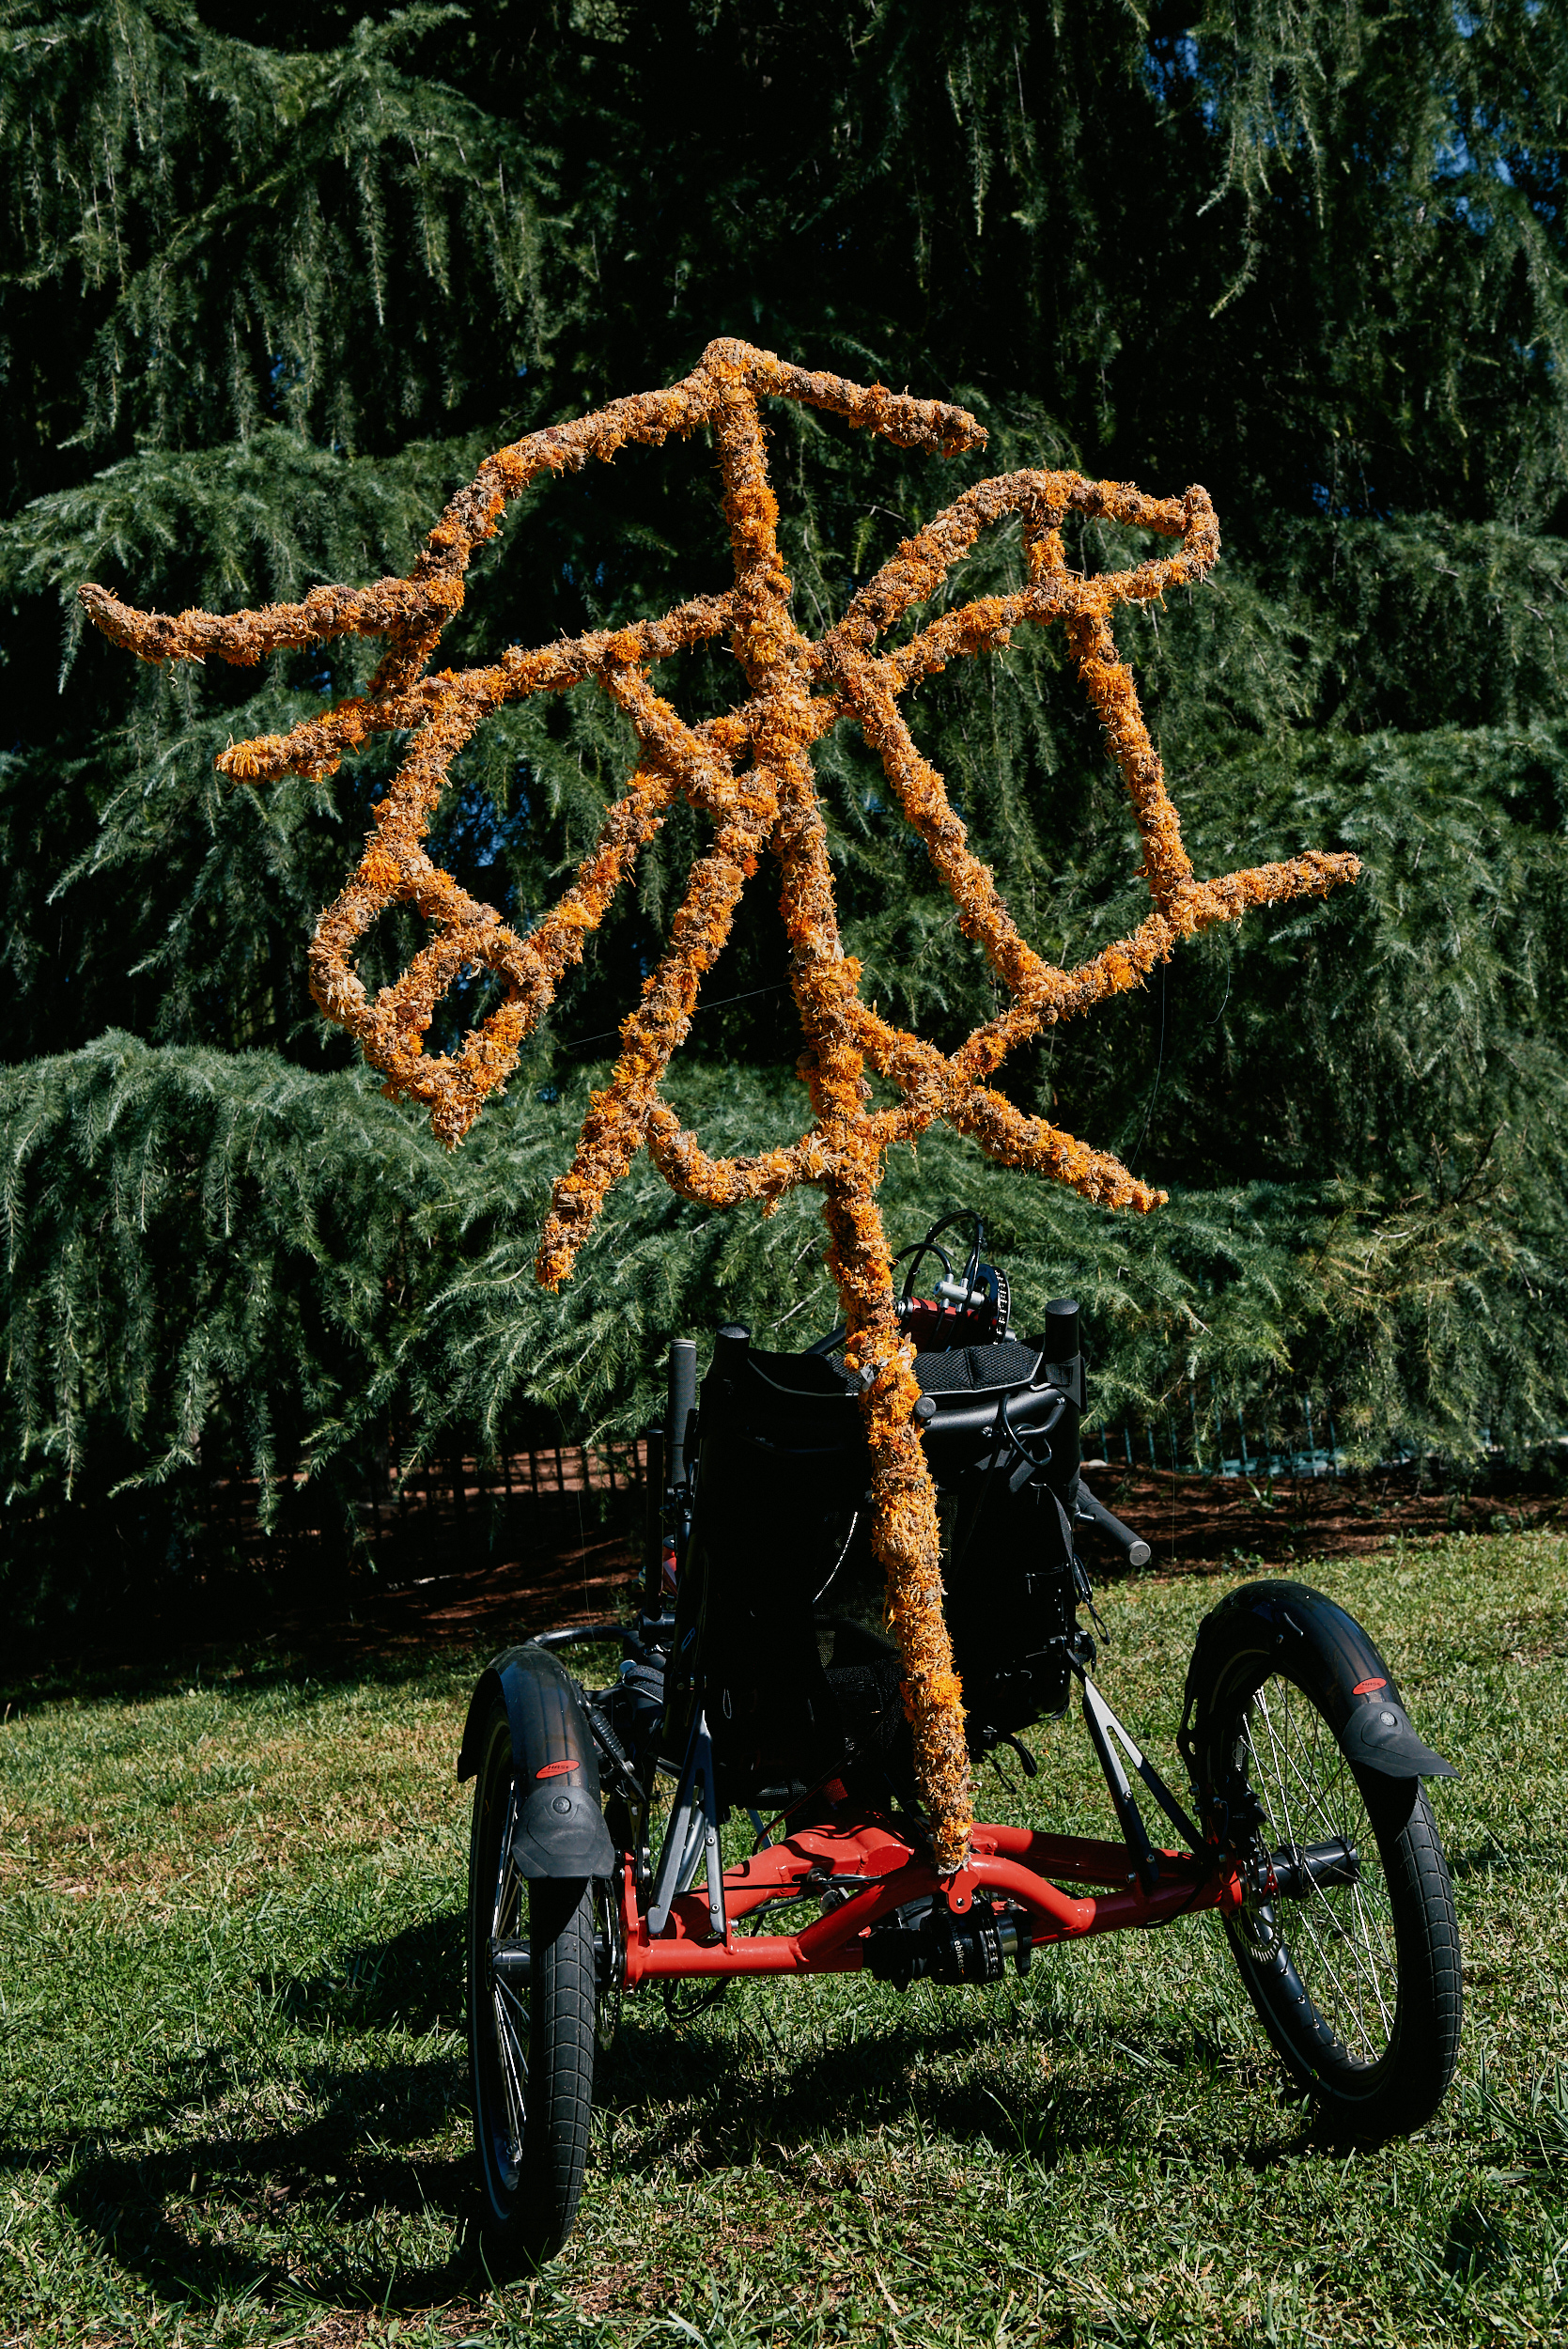 Giuseppina Giordano, I'M (NOT) A TREE #freedomofmovement,Performance, special bikes (handbikes, tricycles), trees and 4 calendula flower sculptures